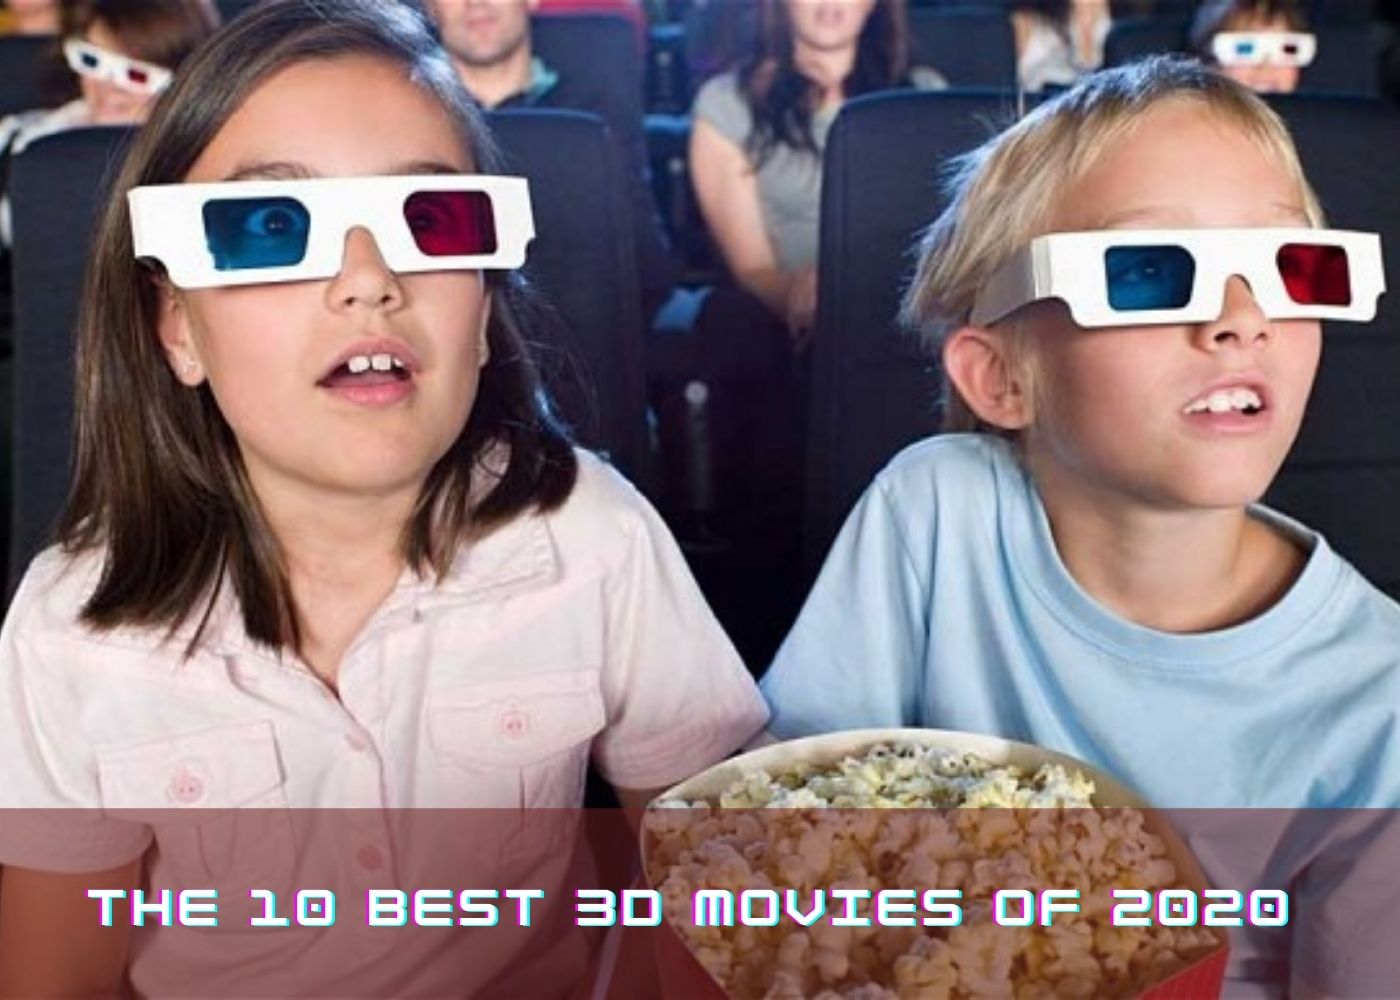 The 10 best 3D movies of 2020 